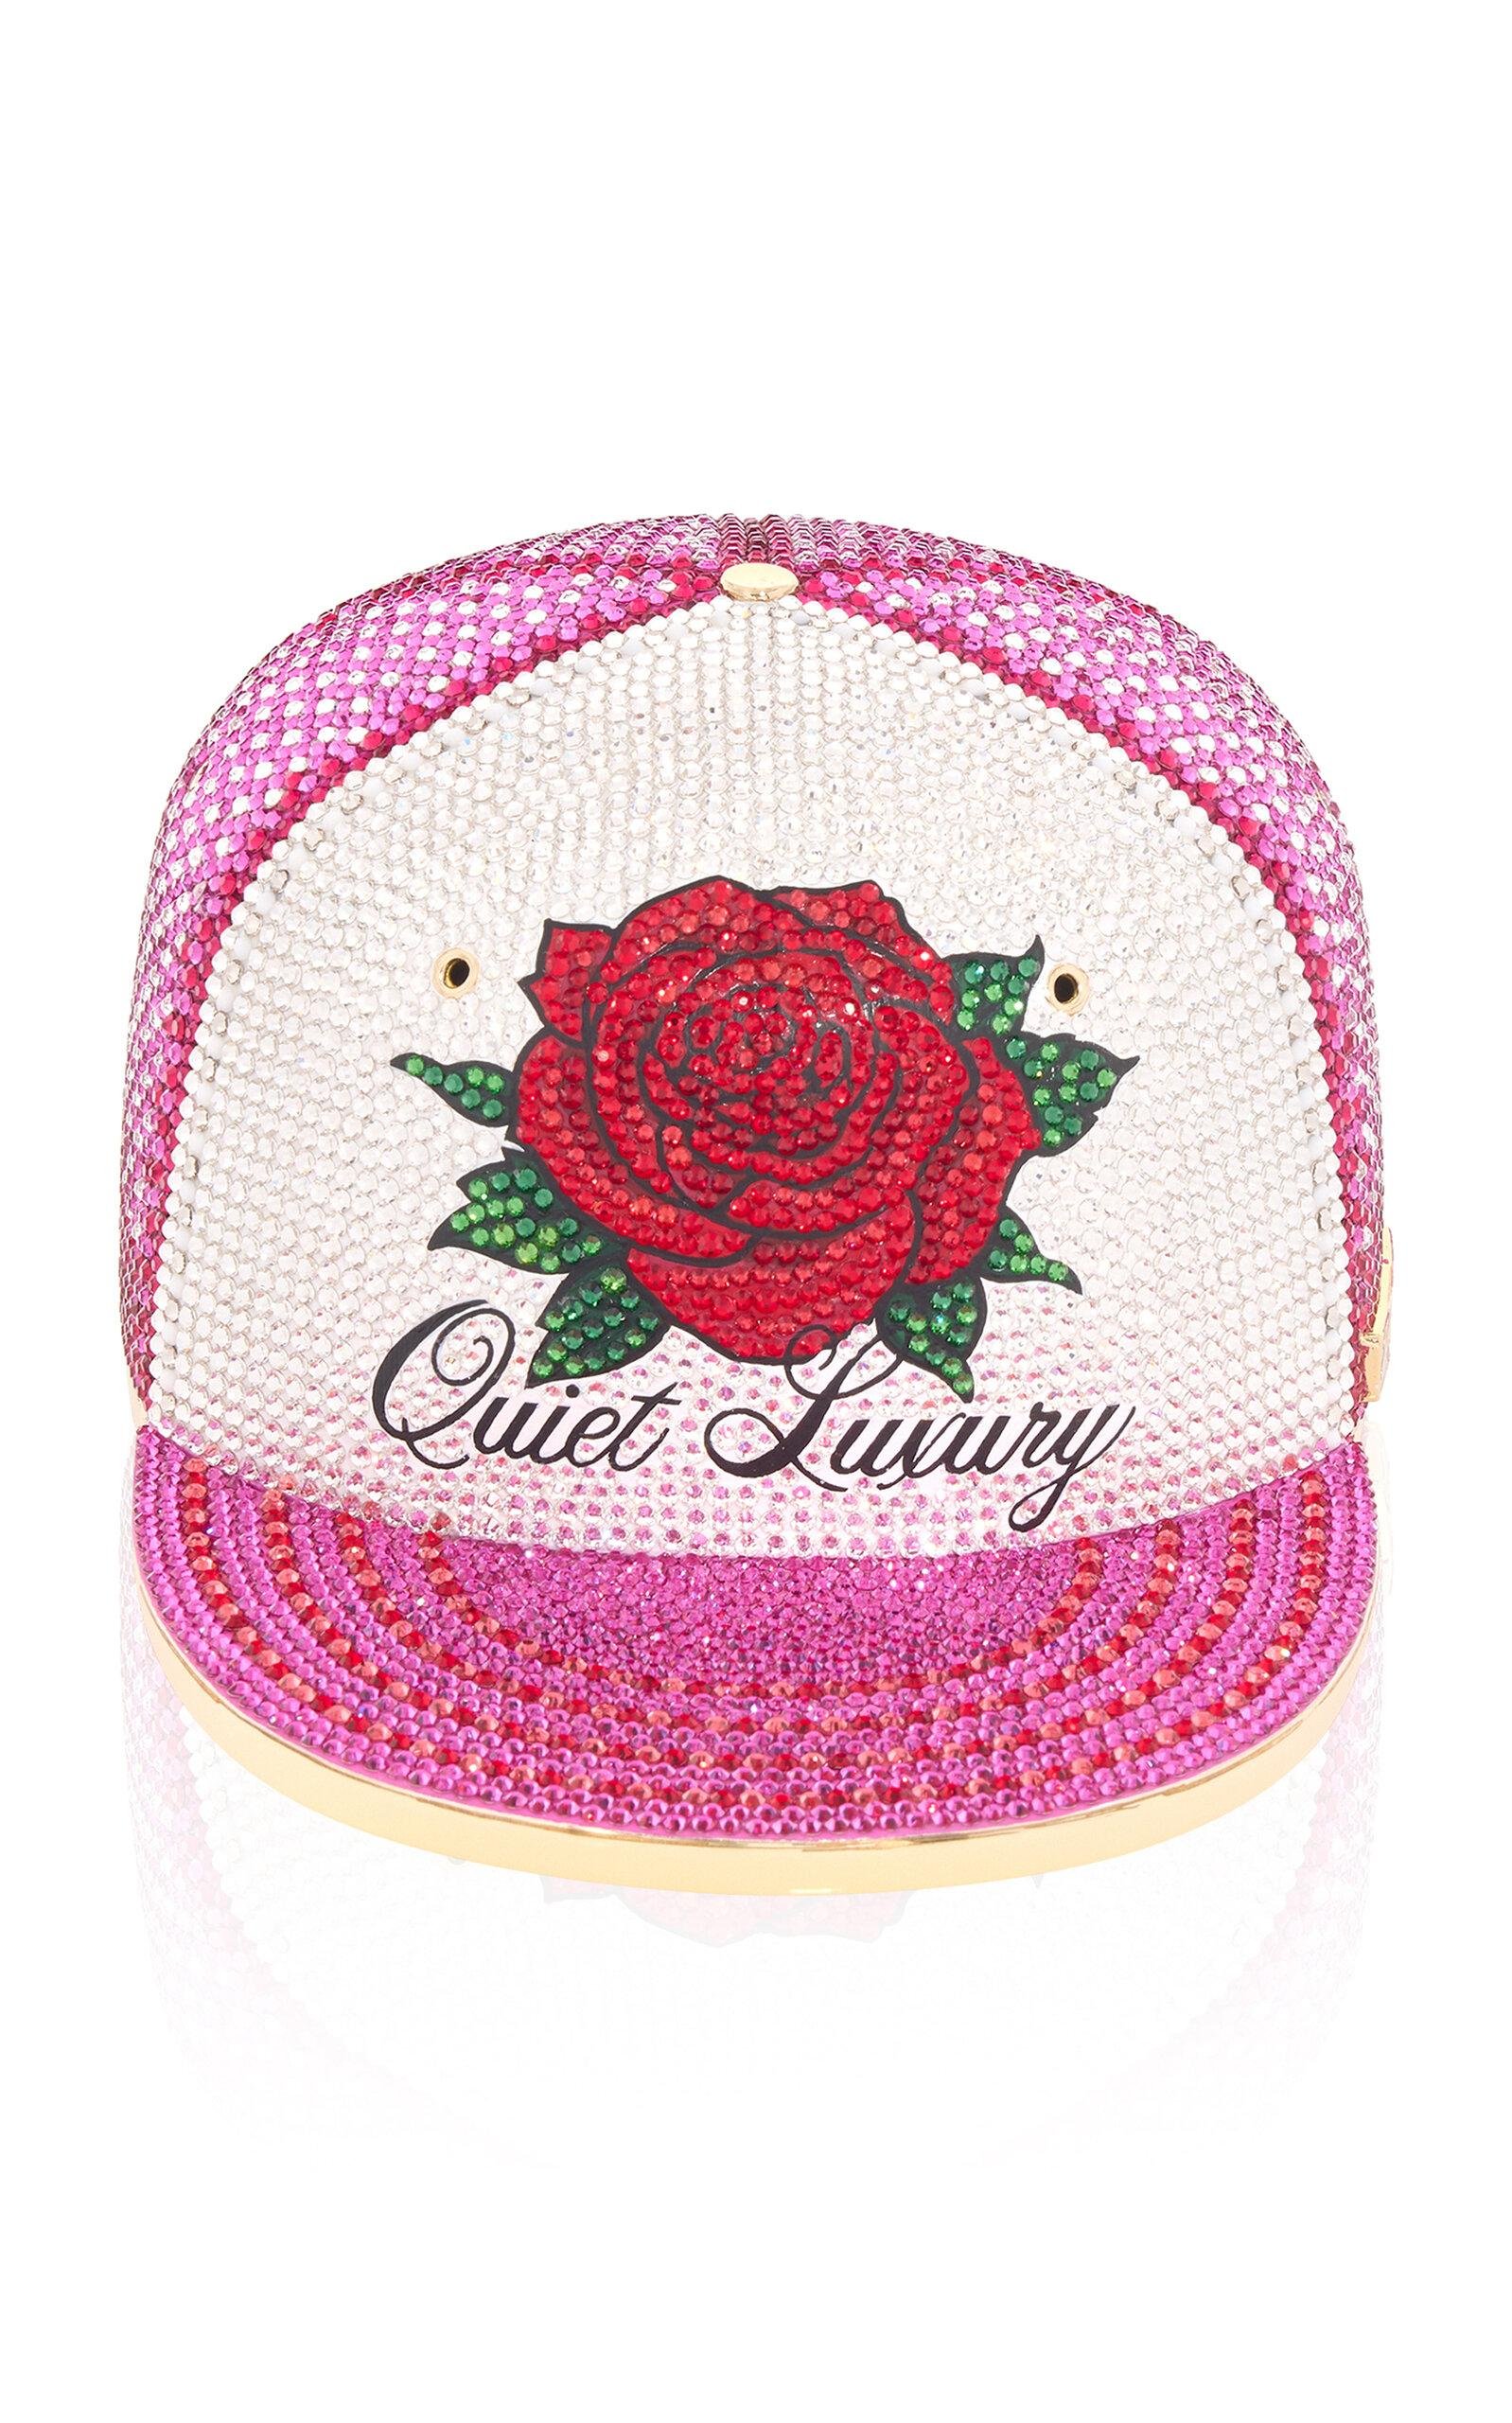 Judith Leiber Couture - Quiet Luxury Cap Crystal Clutch - Pink - OS - Only At Moda Operandi by JUDITH LEIBER COUTURE